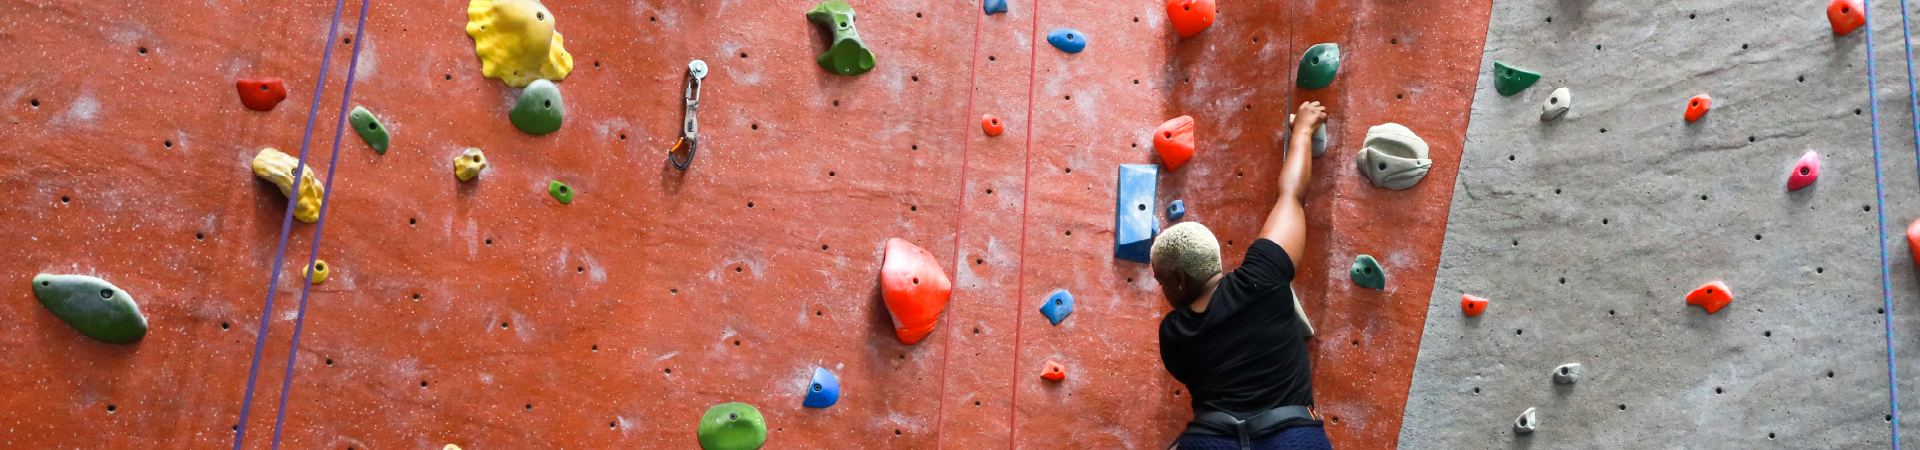  girl wearing a black shirt with harness climbs on red indoor rock wall 